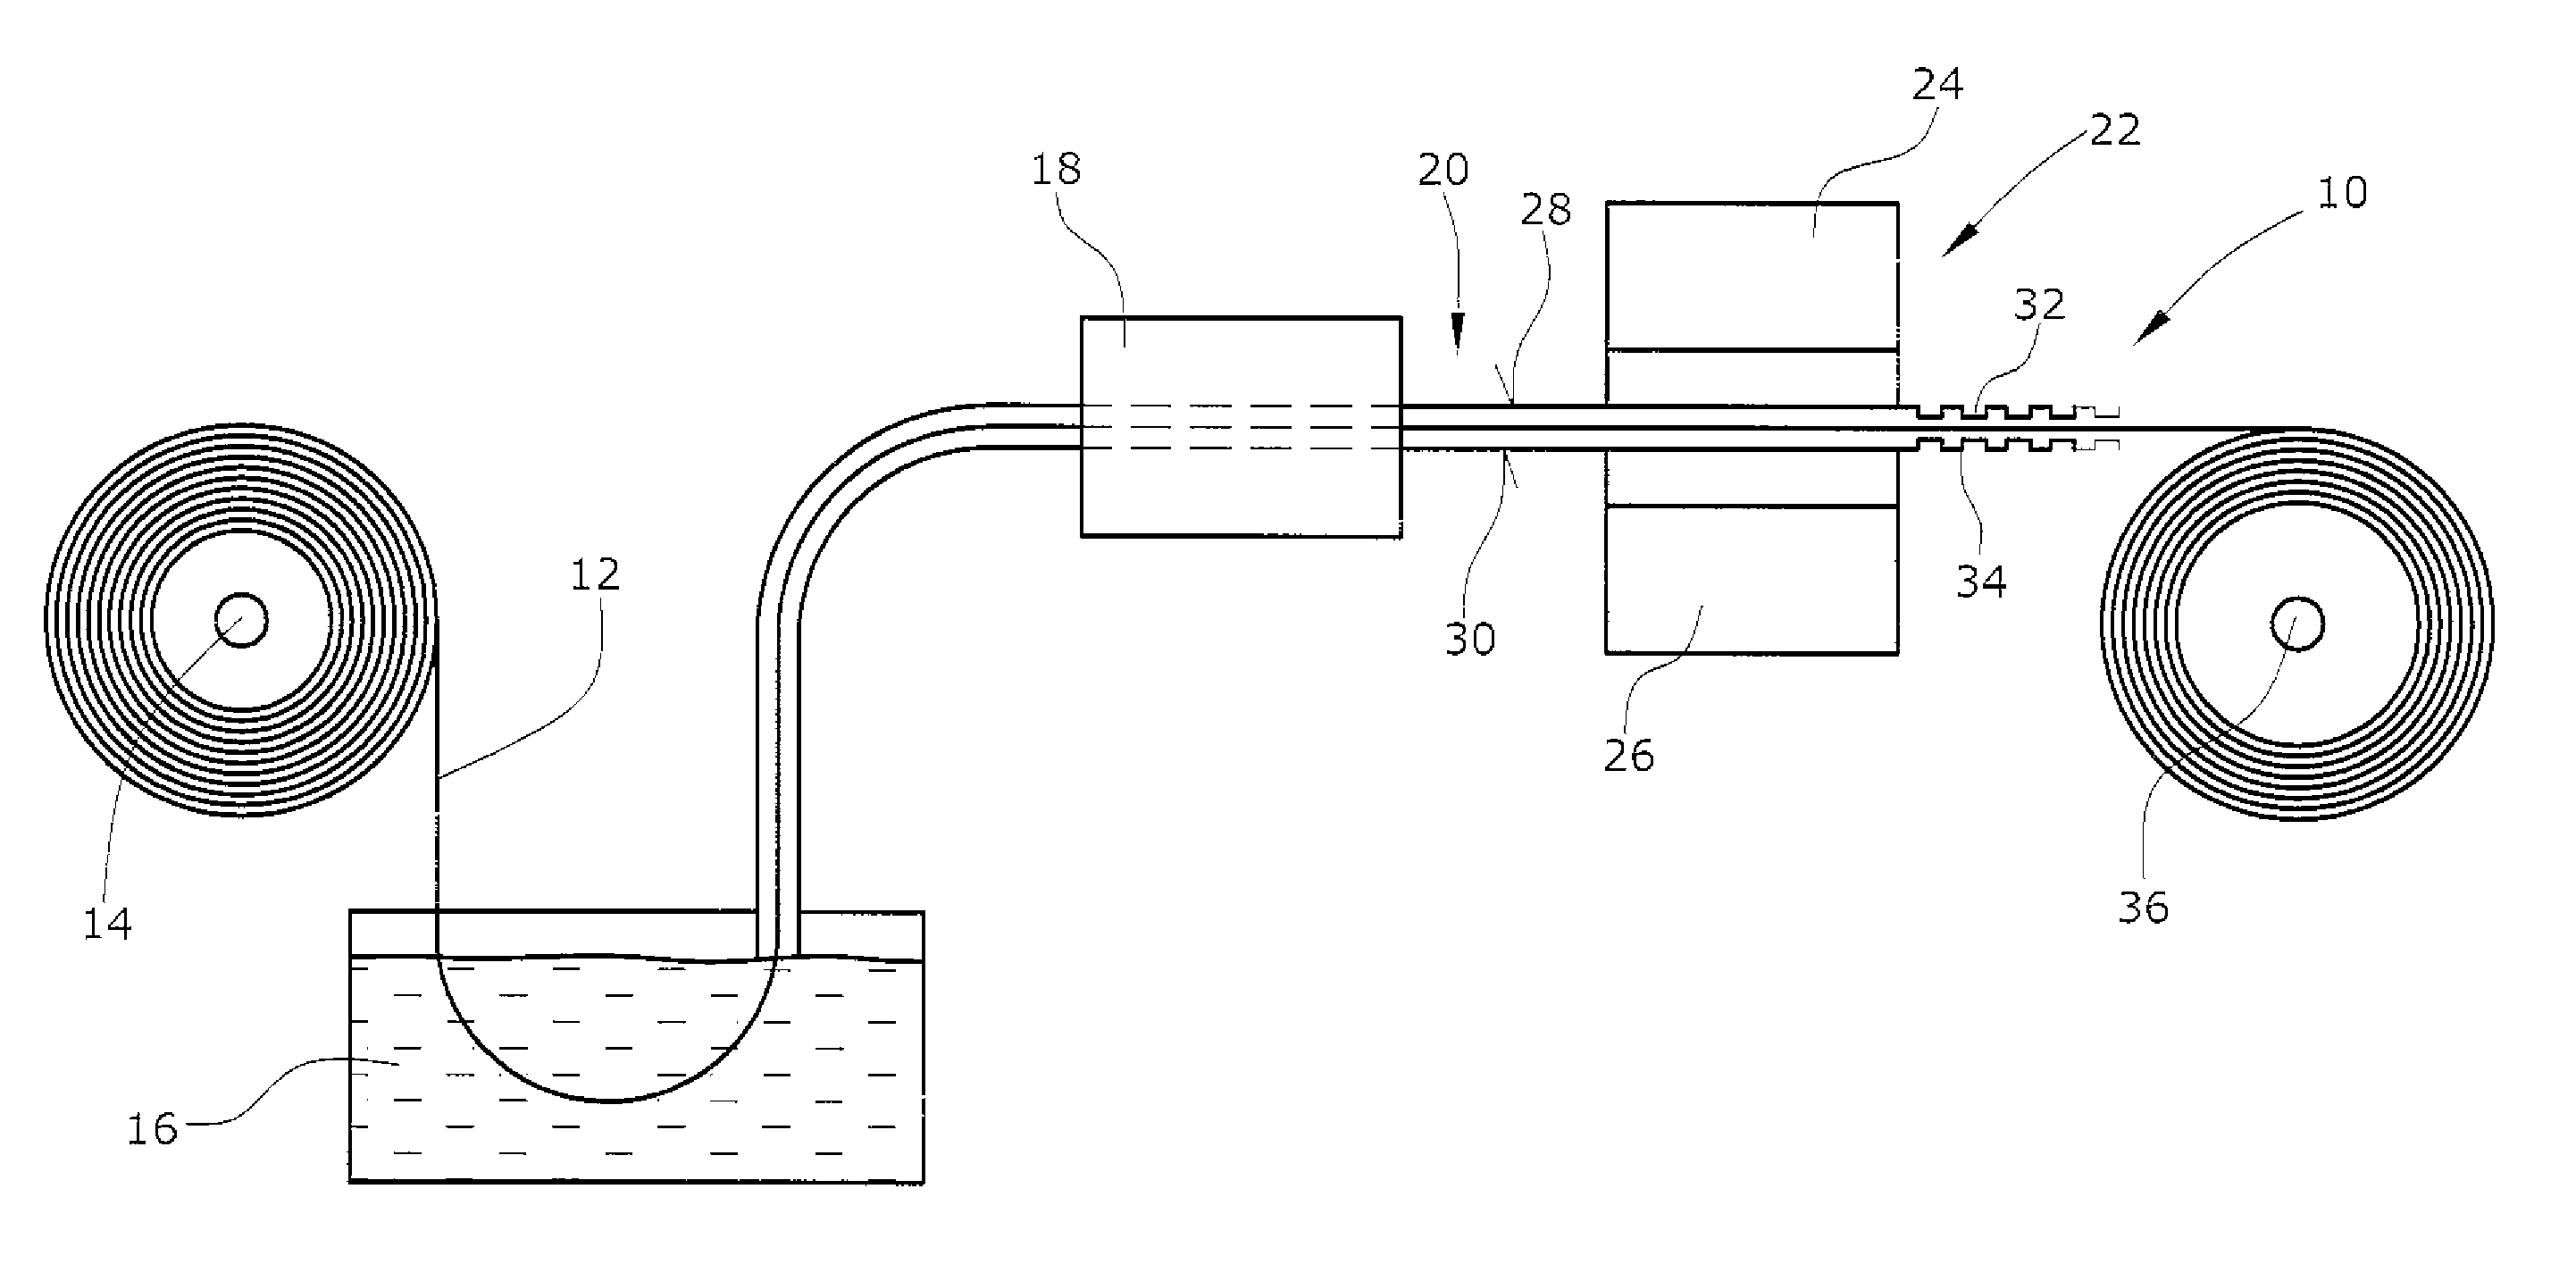 Method For Making A Continuous Laminate, In Particular Suitable As A Spar Cap Or Another Part Of A Wind Energy Turbine Rotor Blade